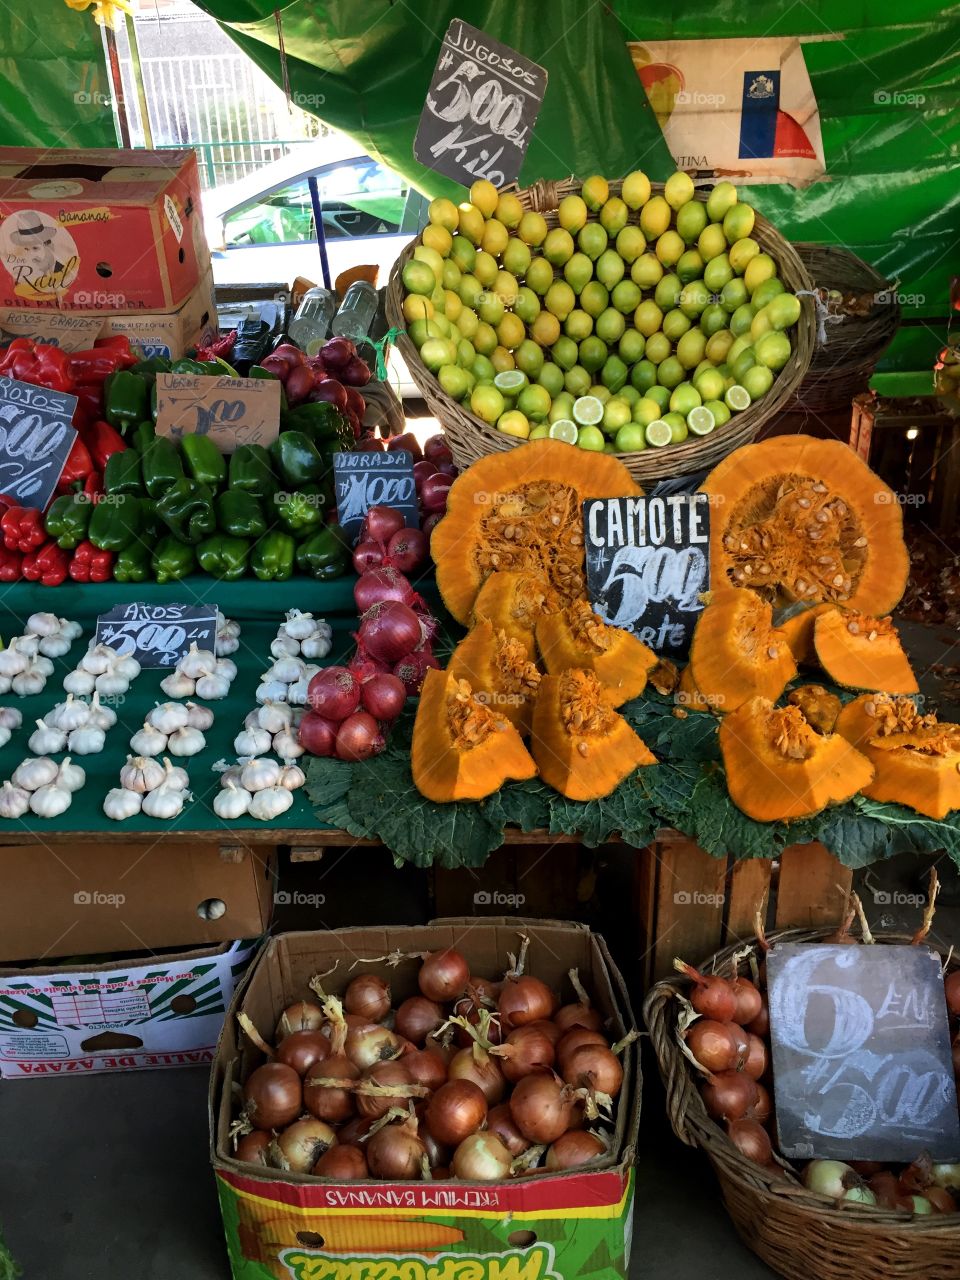 Weekend market vegetable stand, full of color